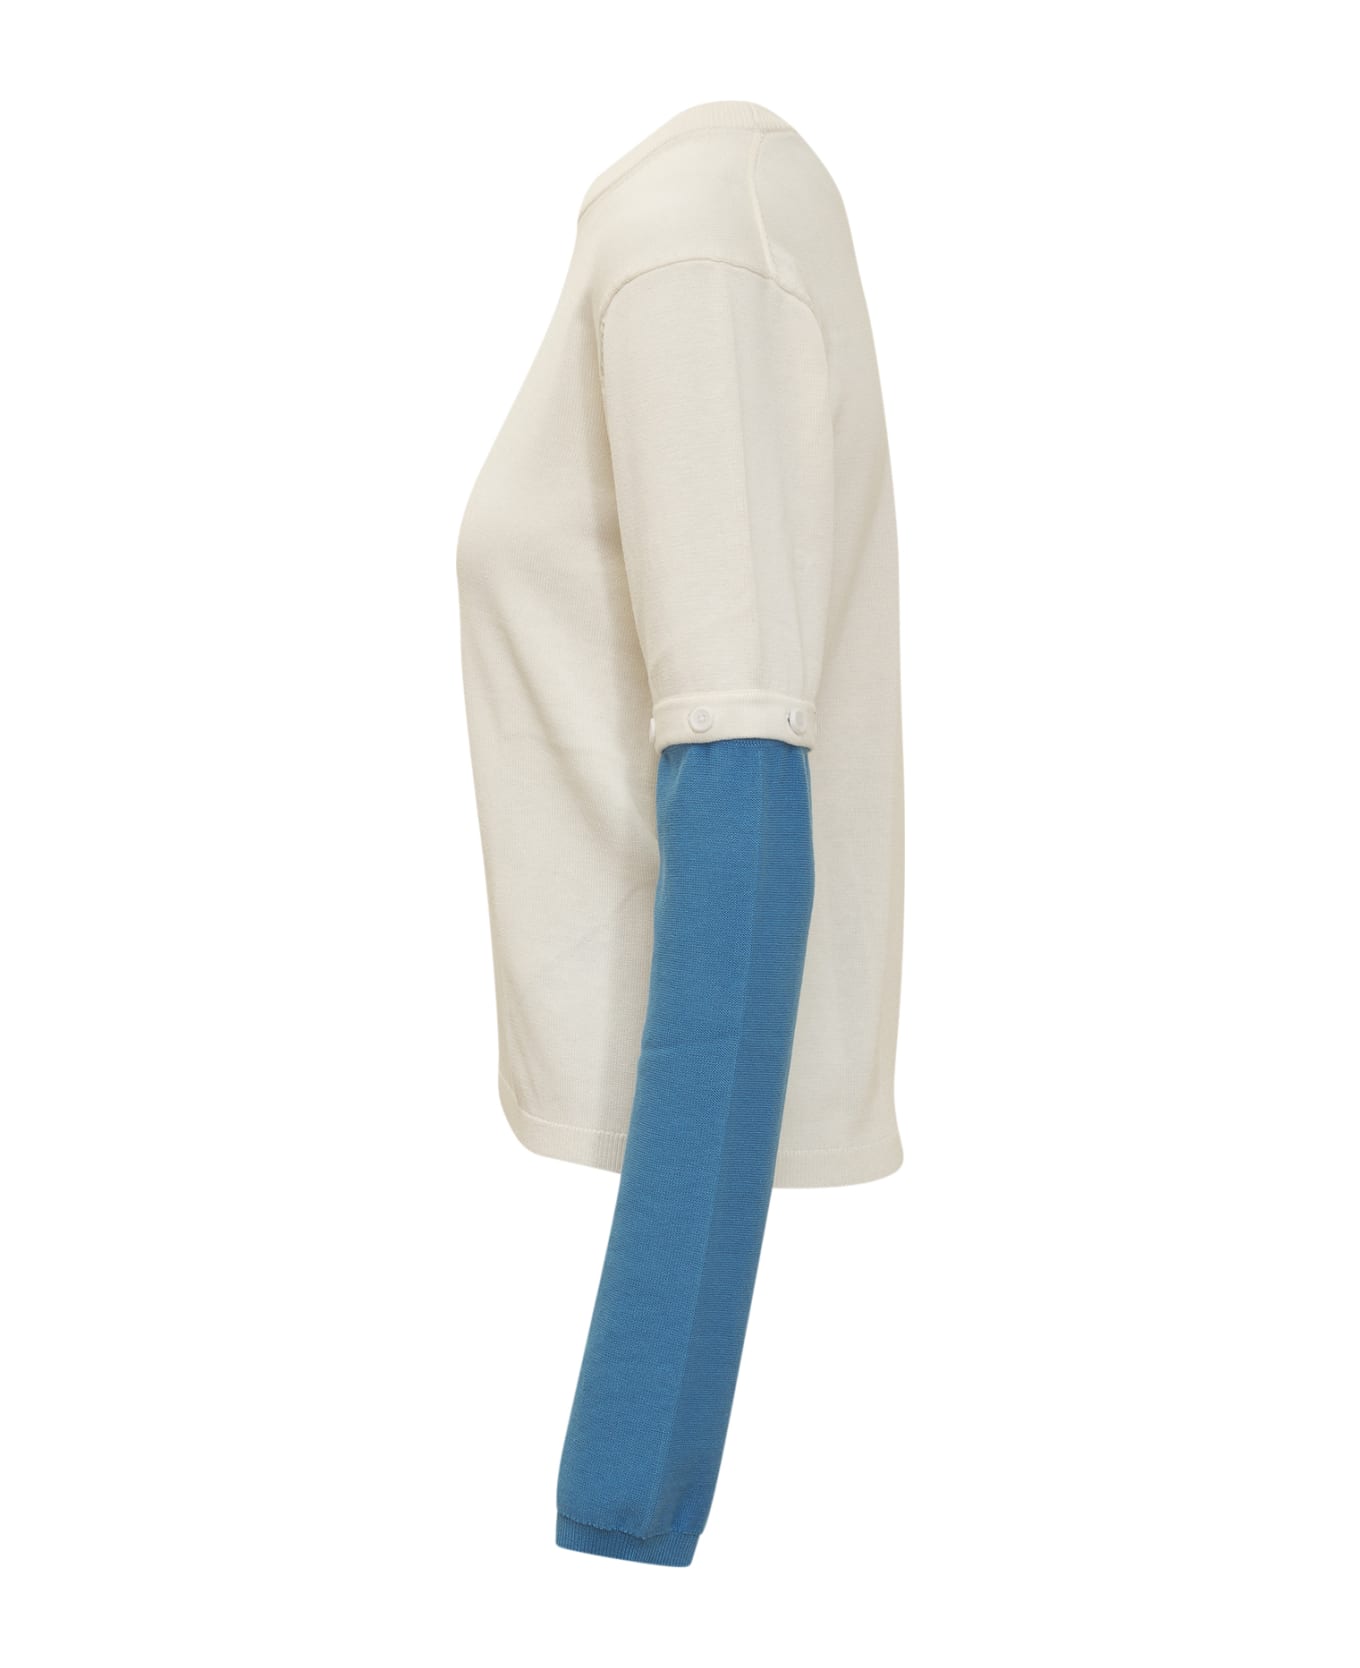 J.W. Anderson Contrast Sleeve Jump - WHITE